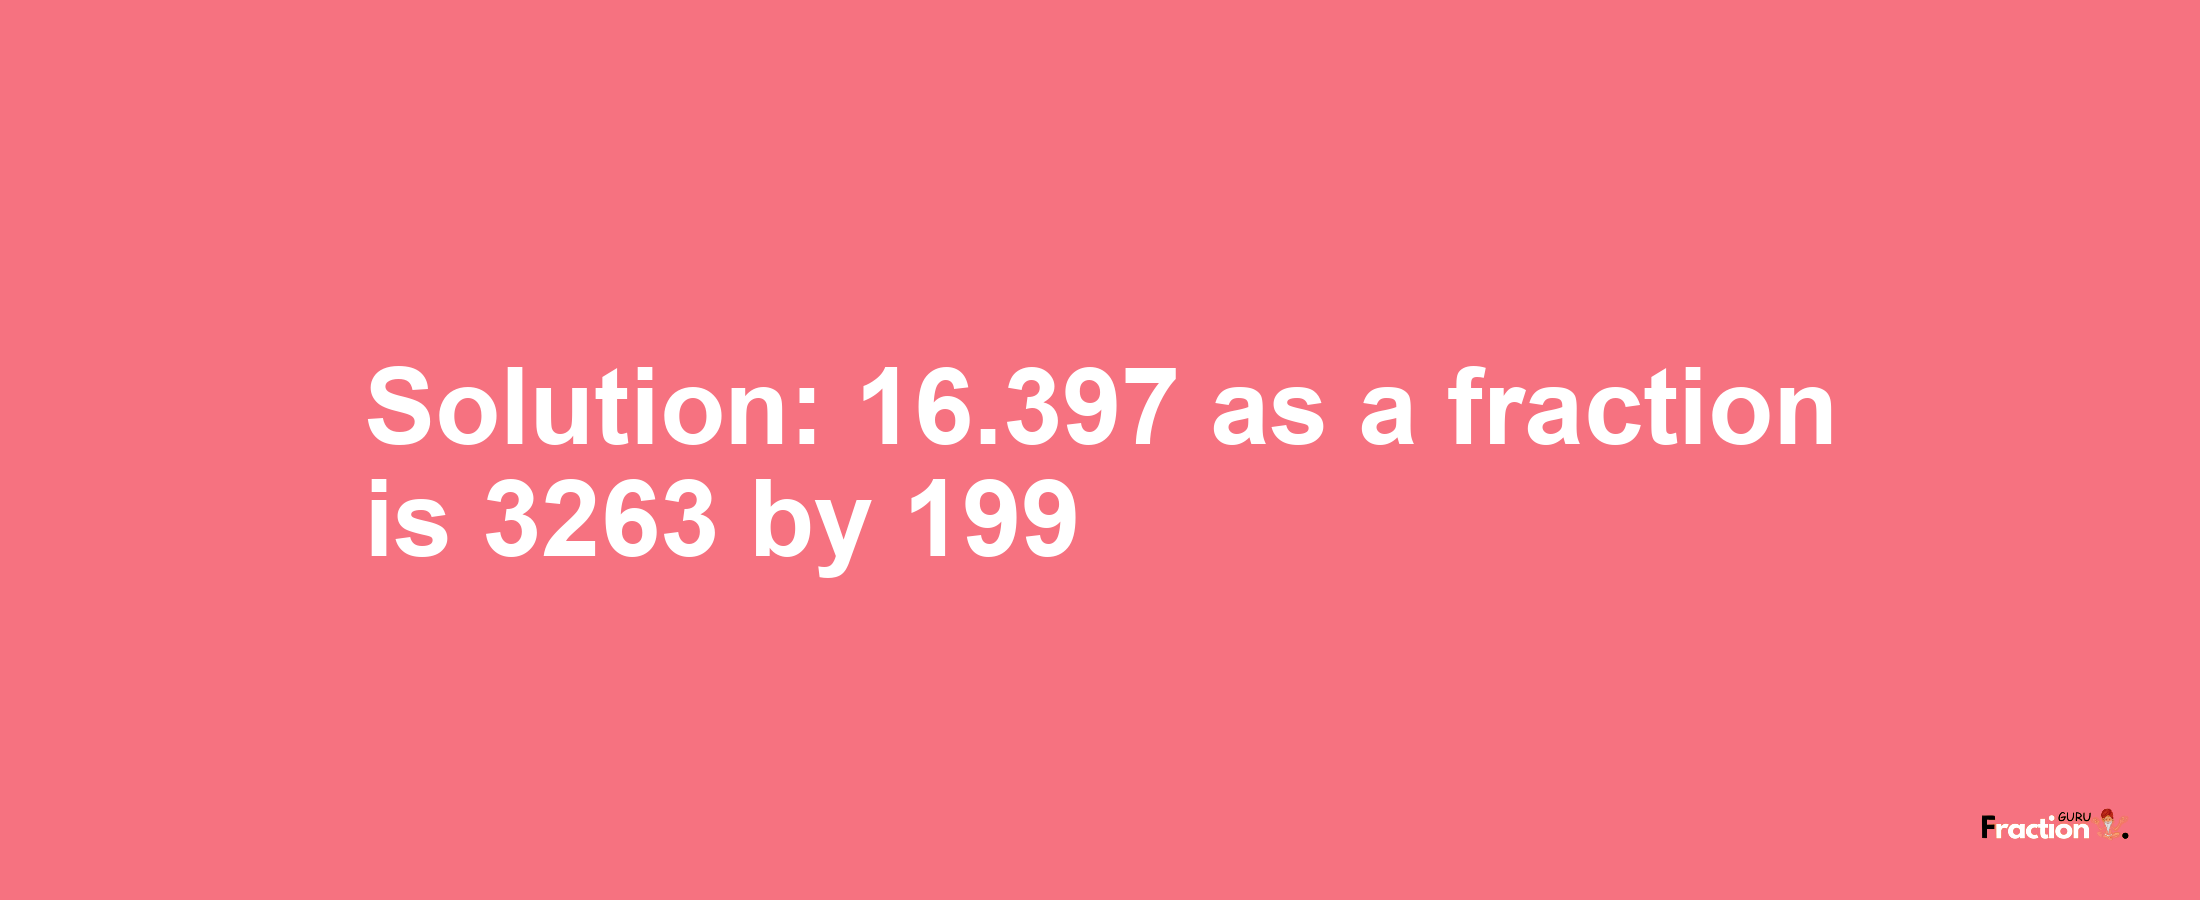 Solution:16.397 as a fraction is 3263/199